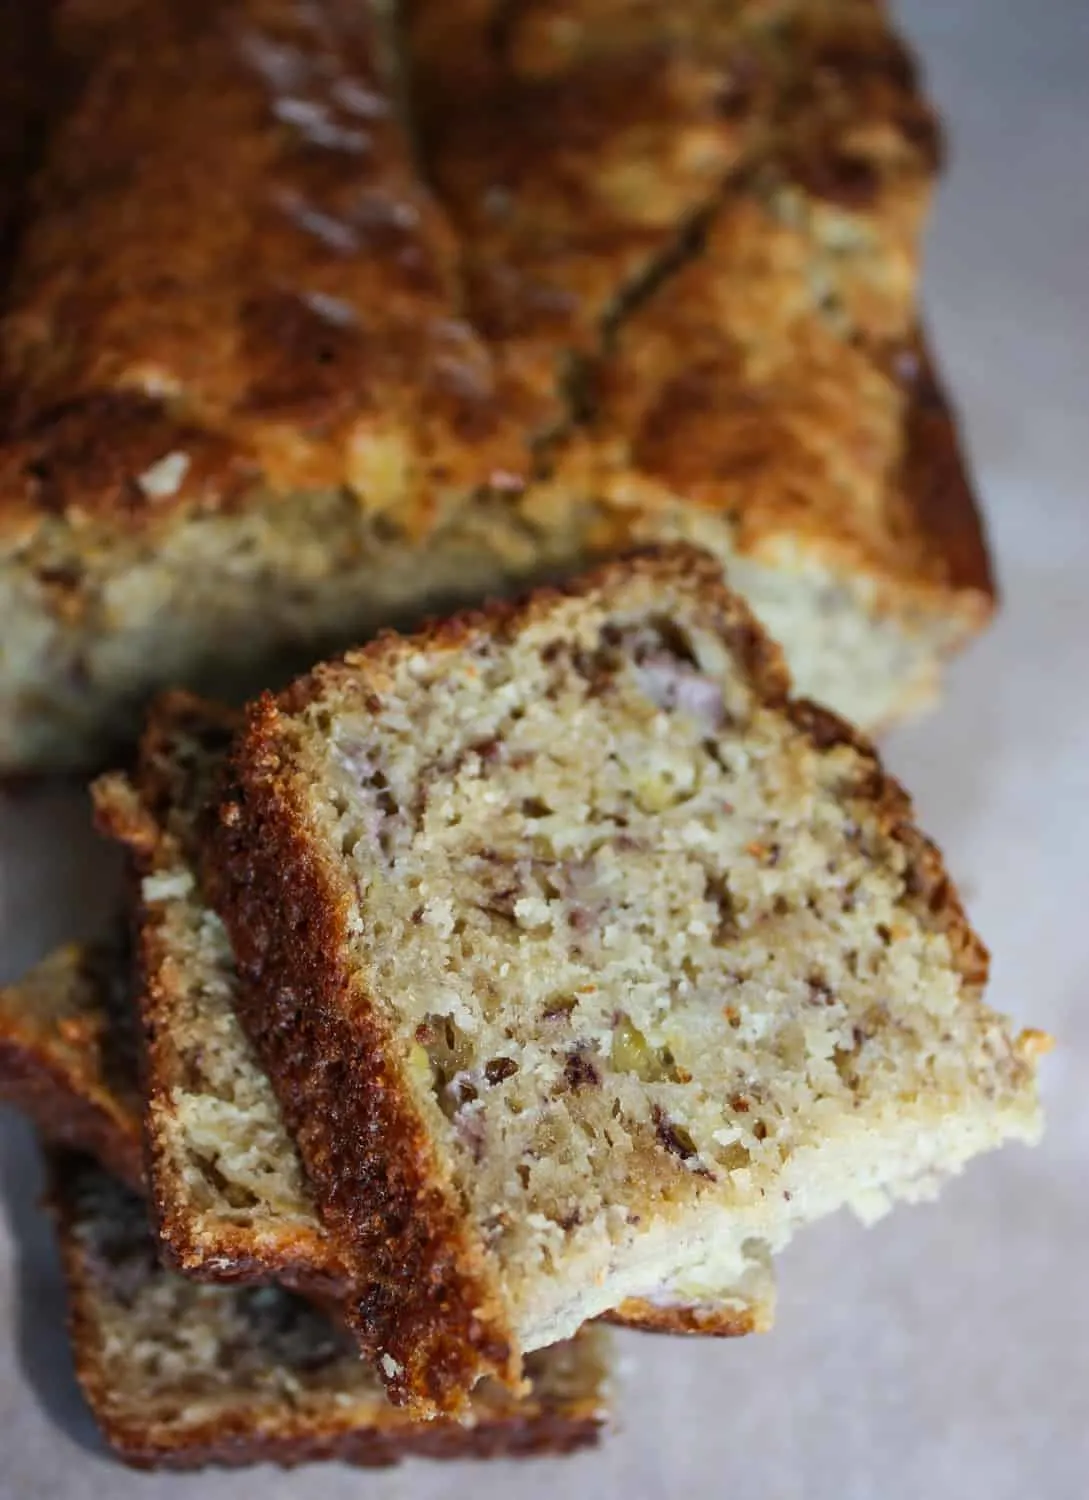 This moist banana bread is a staple in our home.  It is one of the first recipes I converted when I learned I could no longer eat gluten.